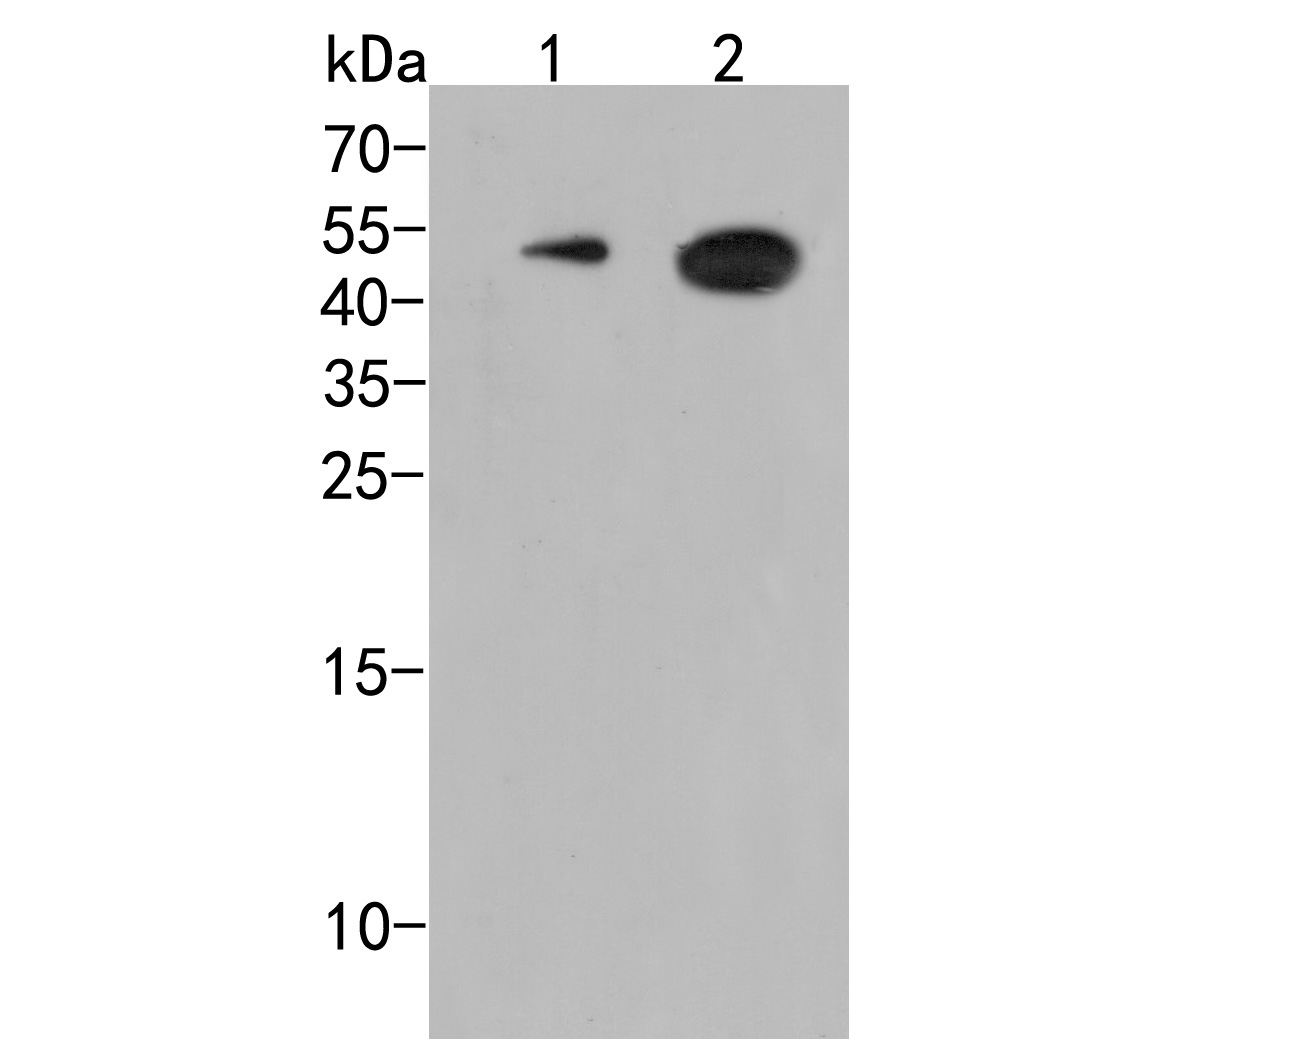 Western blot analysis of CD28 on different lysates. Proteins were transferred to a PVDF membrane and blocked with 5% BSA in PBS for 1 hour at room temperature. The primary antibody (ER2001-42, 1/500) was used in 5% BSA at room temperature for 2 hours. Goat Anti-Rabbit IgG - HRP Secondary Antibody (HA1001) at 1:5,000 dilution was used for 1 hour at room temperature.<br />
Positive control: <br />
Lane 1: Mouse spleen tissue lysate<br />
Lane 2: U937 cell lysate